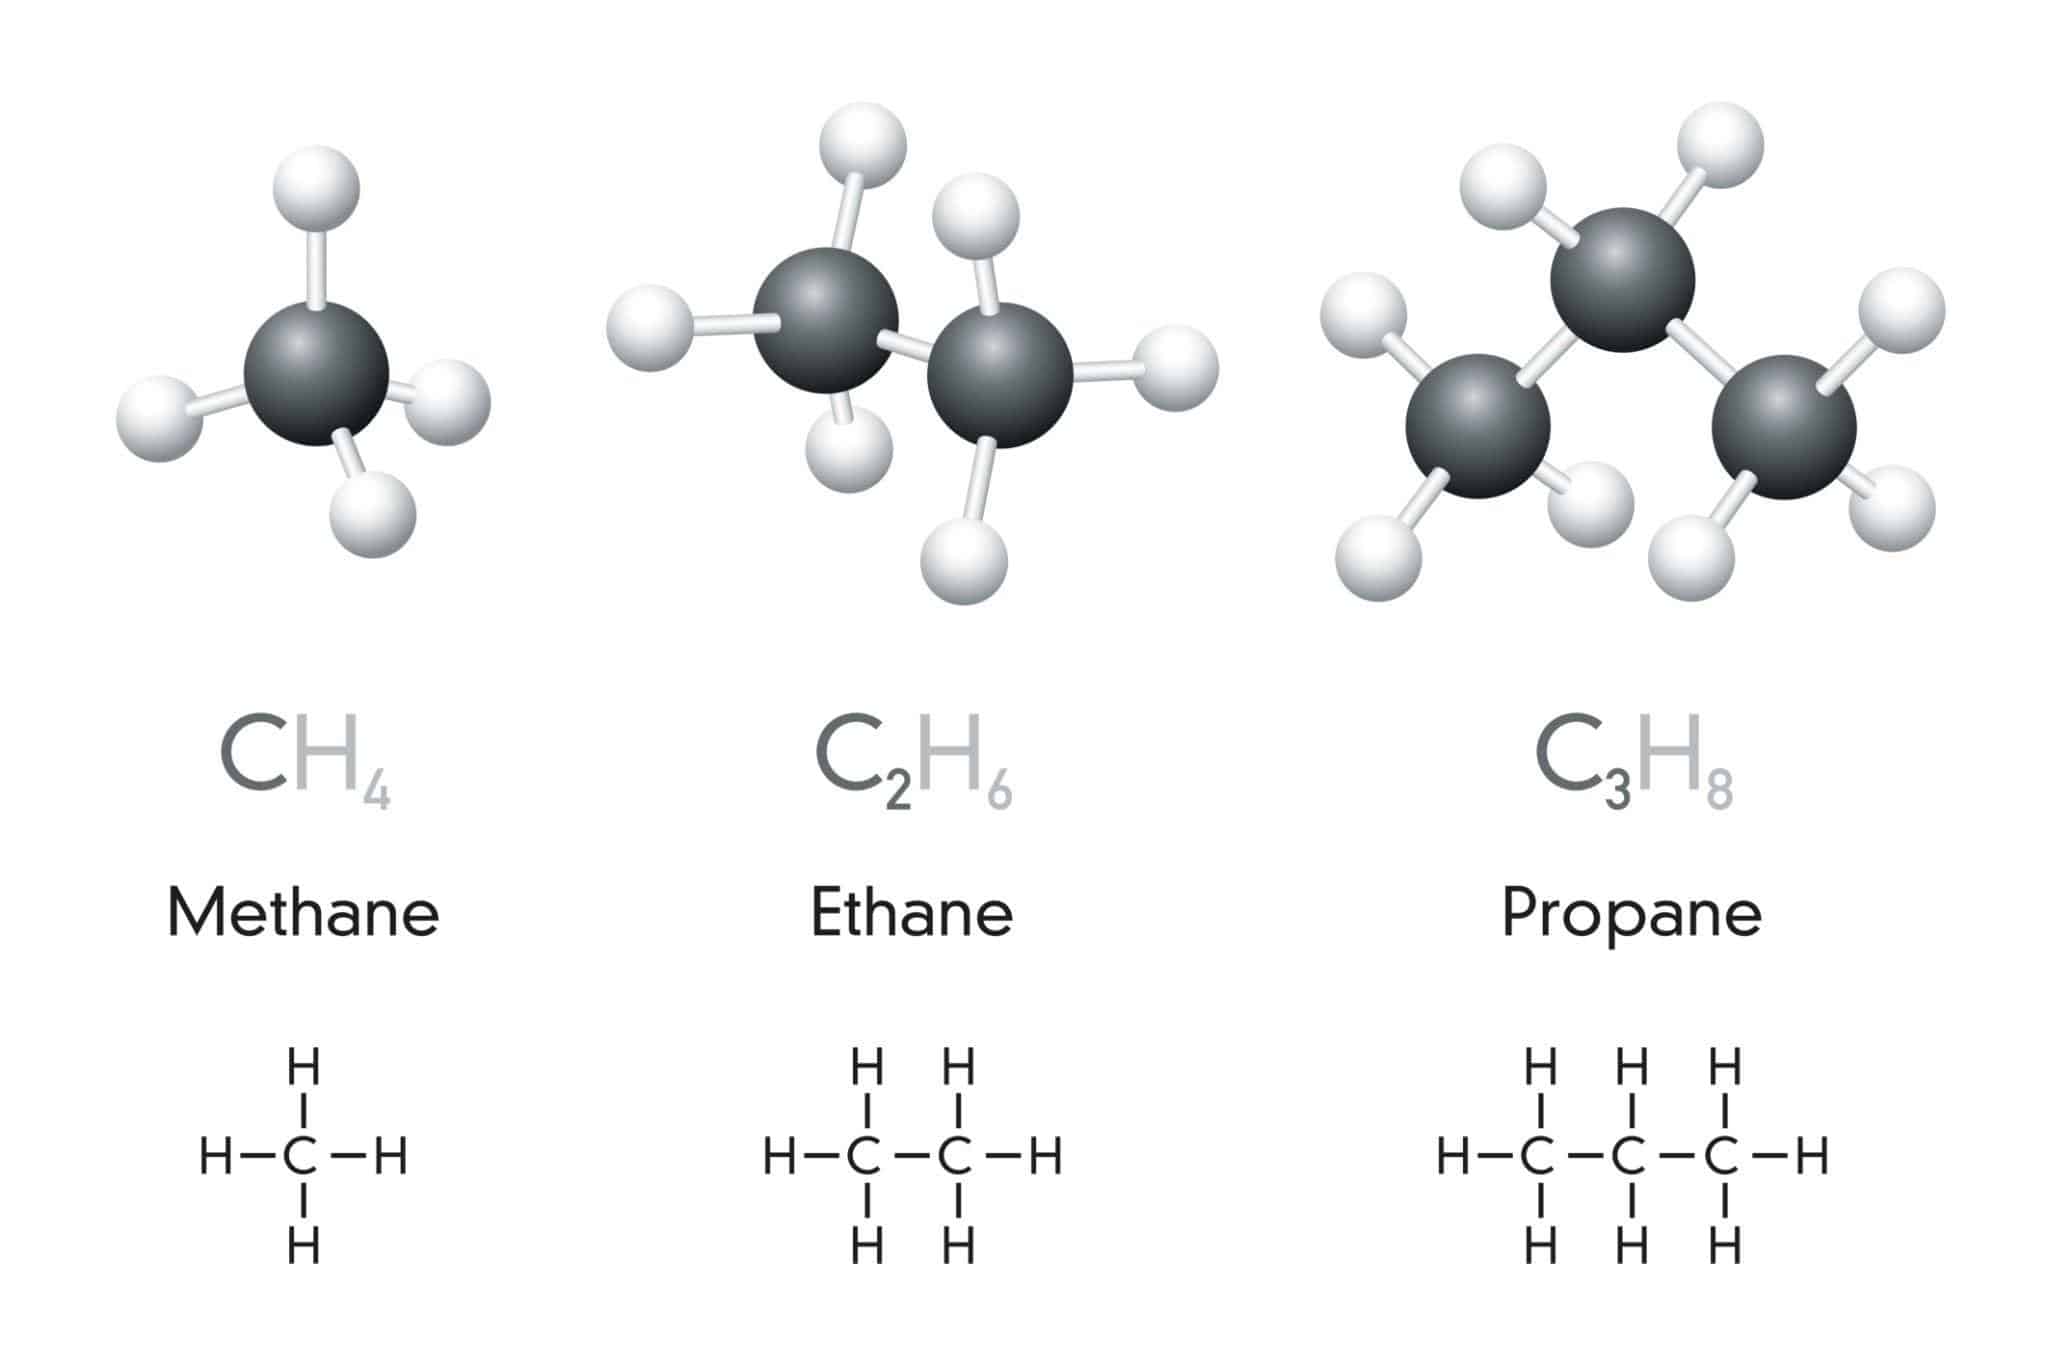 Difference Between Methane and Ethane